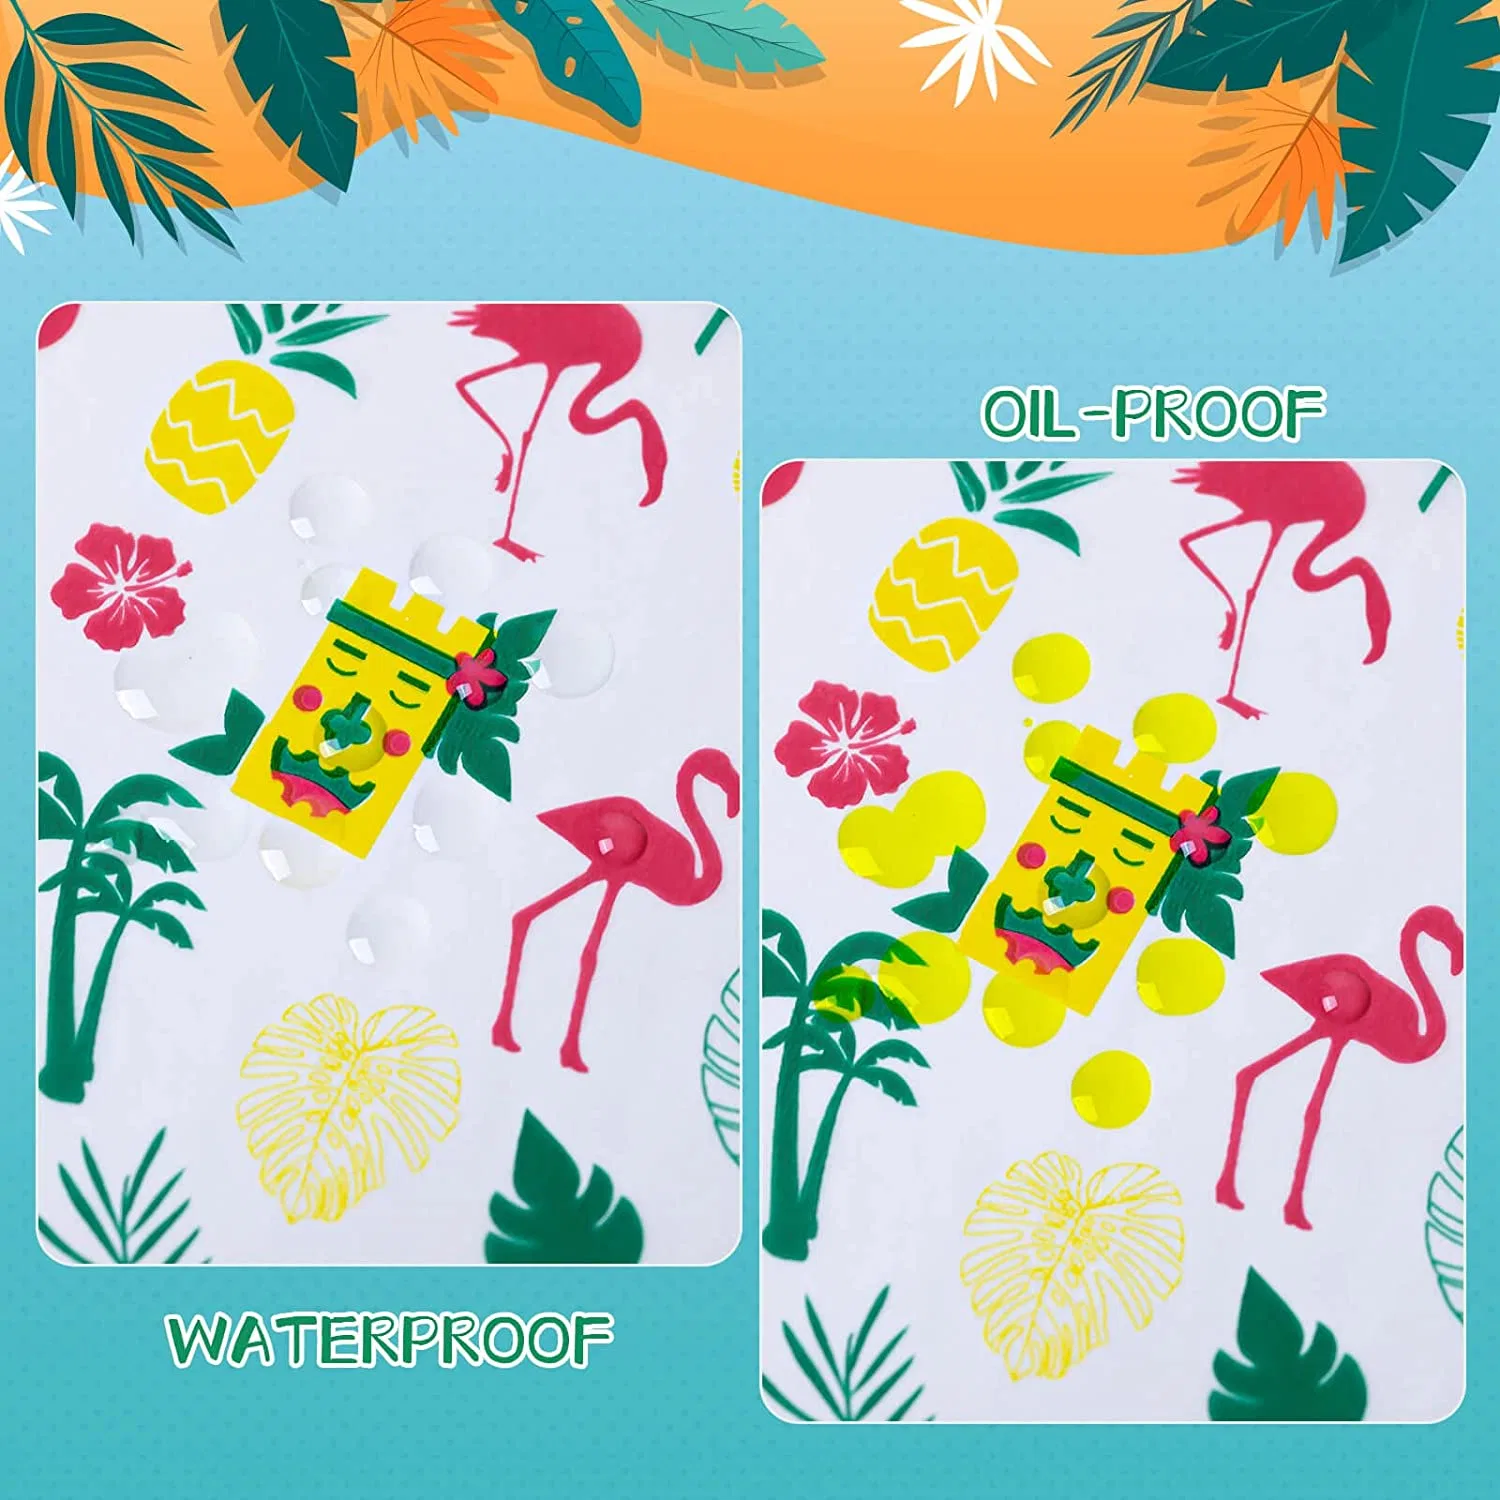 Hawaii Island Waxed Paper, Oil-Proof Deli Paper Sandwich Wrappers, Candy Cookie Wrappers, Picnic Baskets, Kitchen Craft Food Liners, Waxed Paper for Food